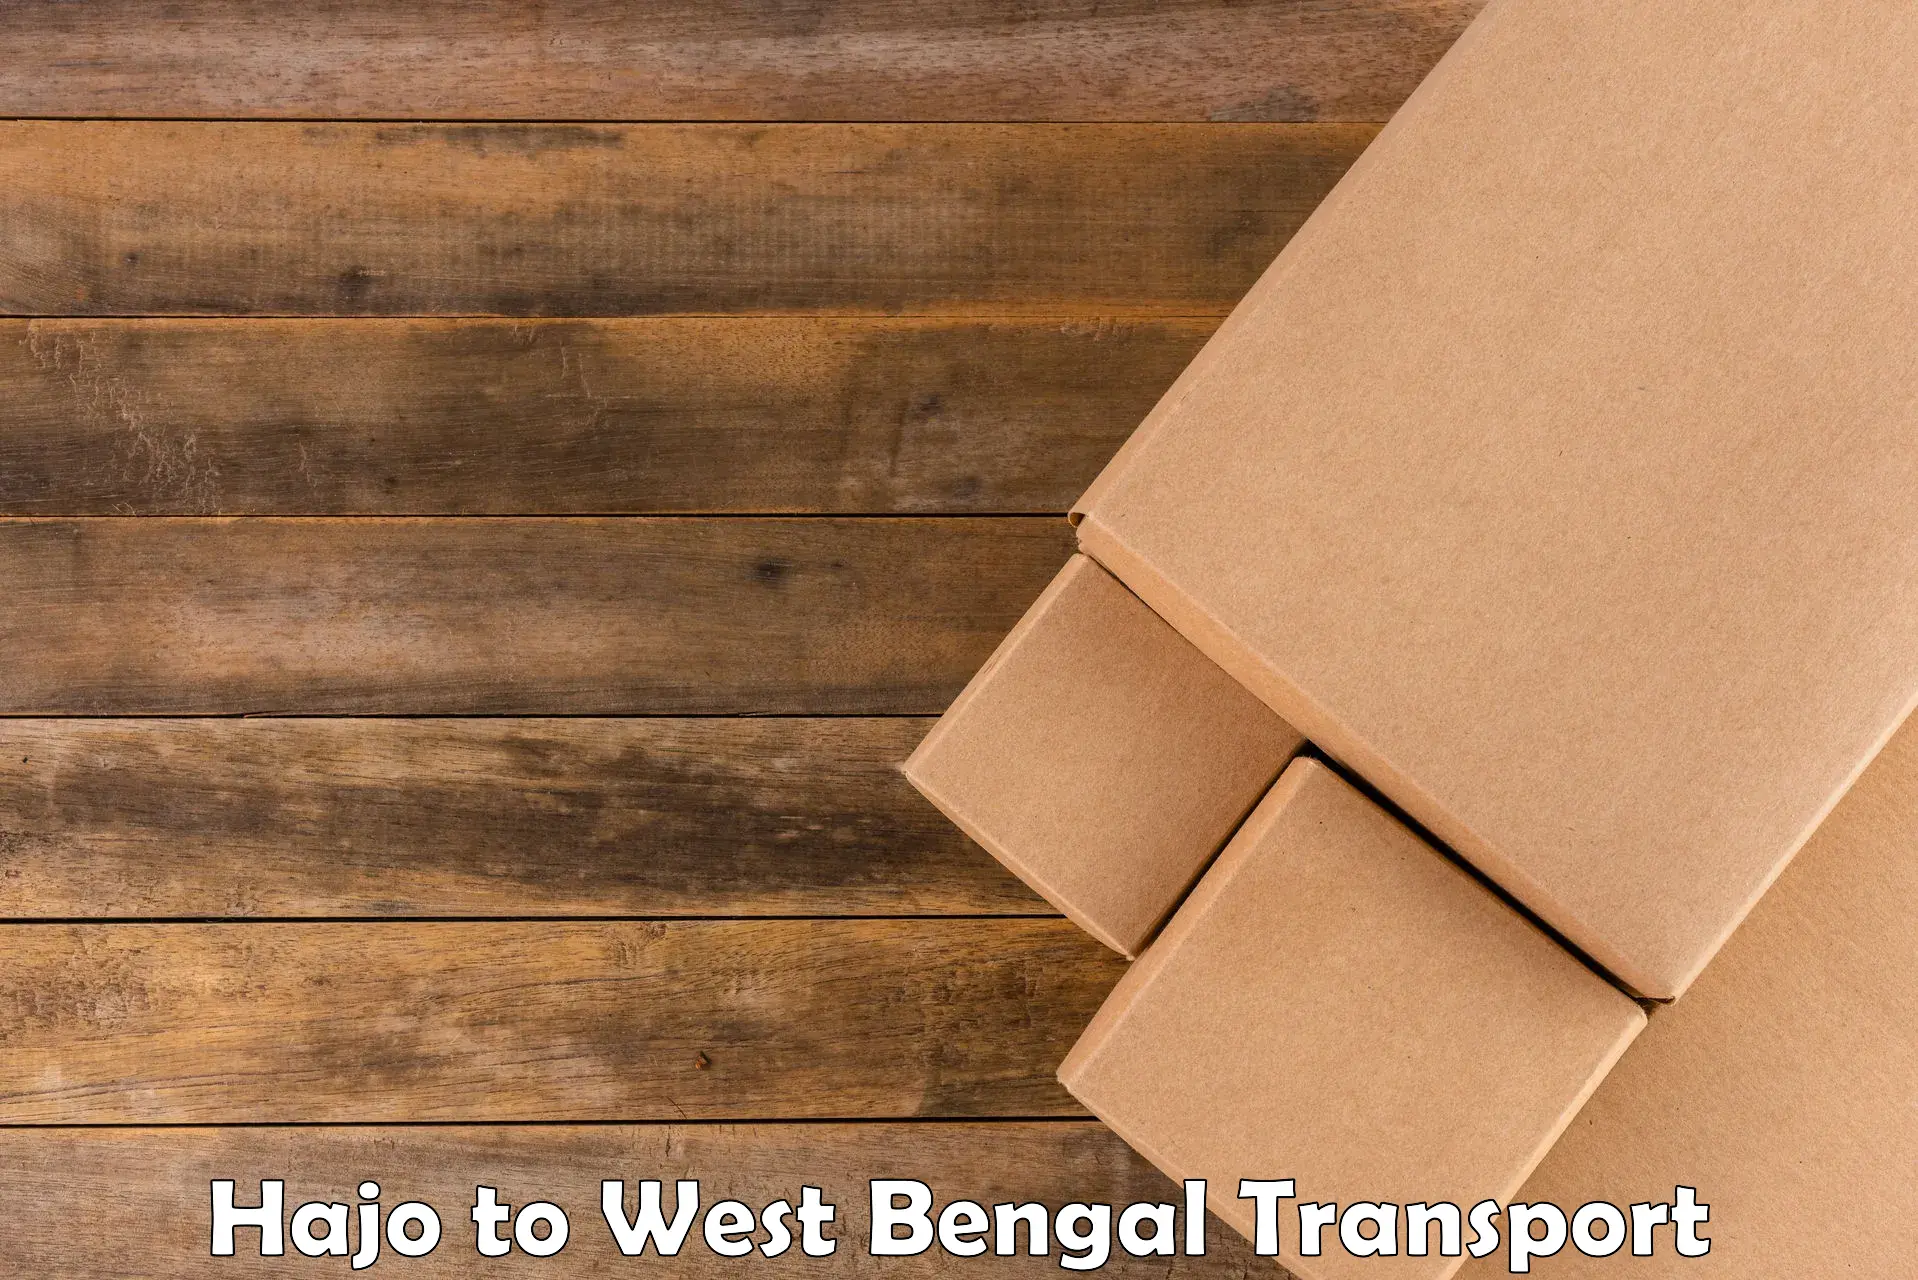 Online transport booking Hajo to West Bengal